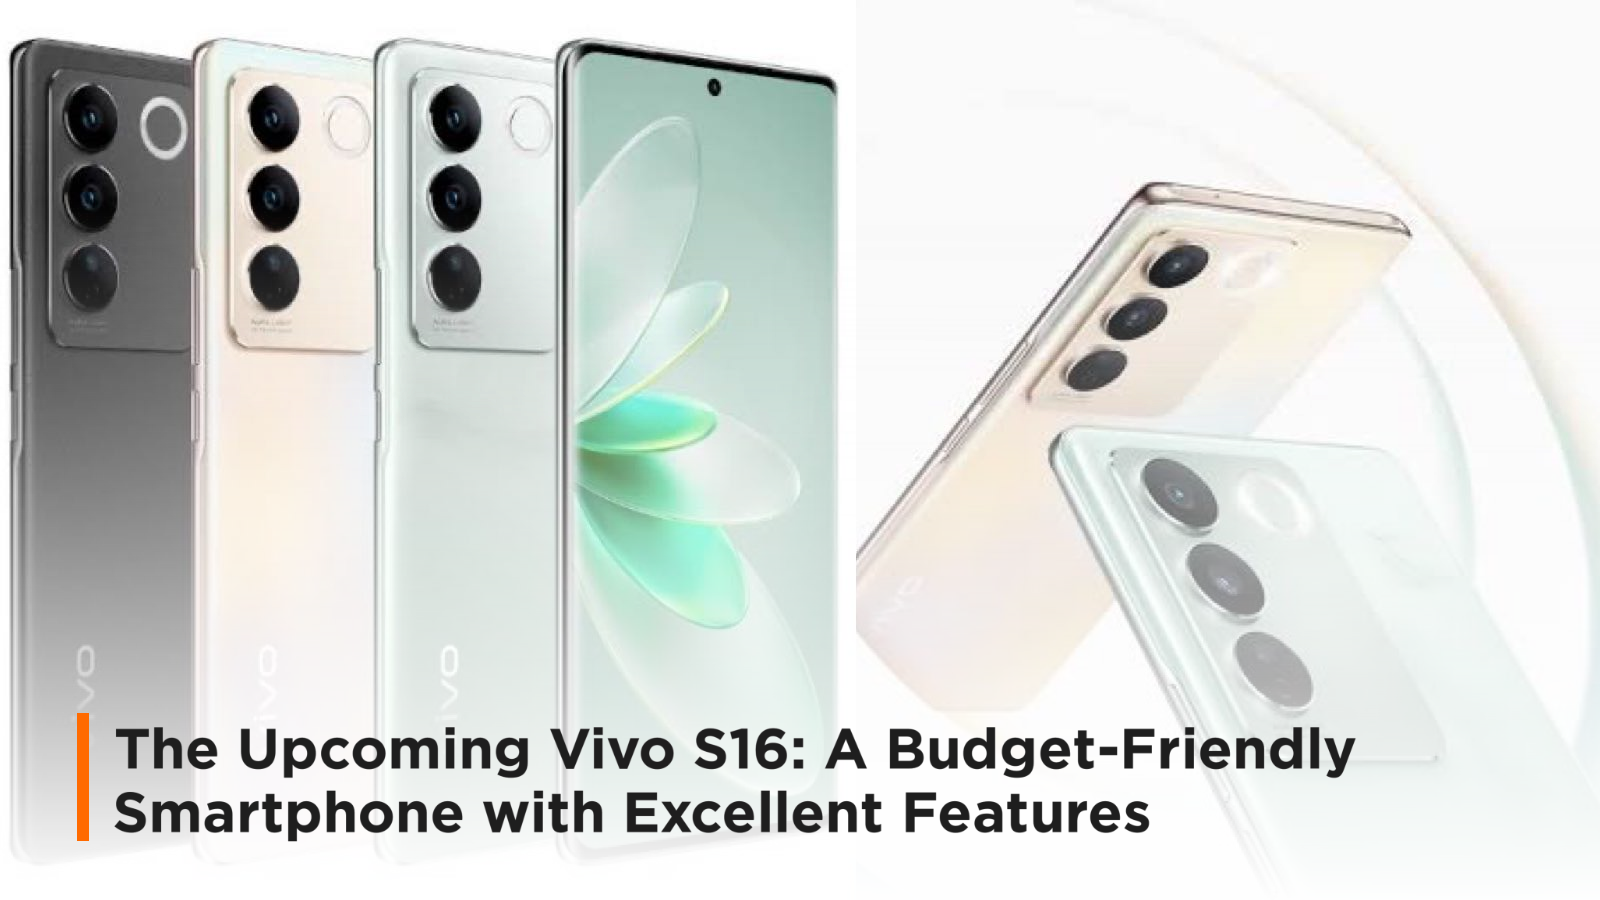 The Upcoming Vivo S16: A Budget-Friendly Smartphone with Excellent Features